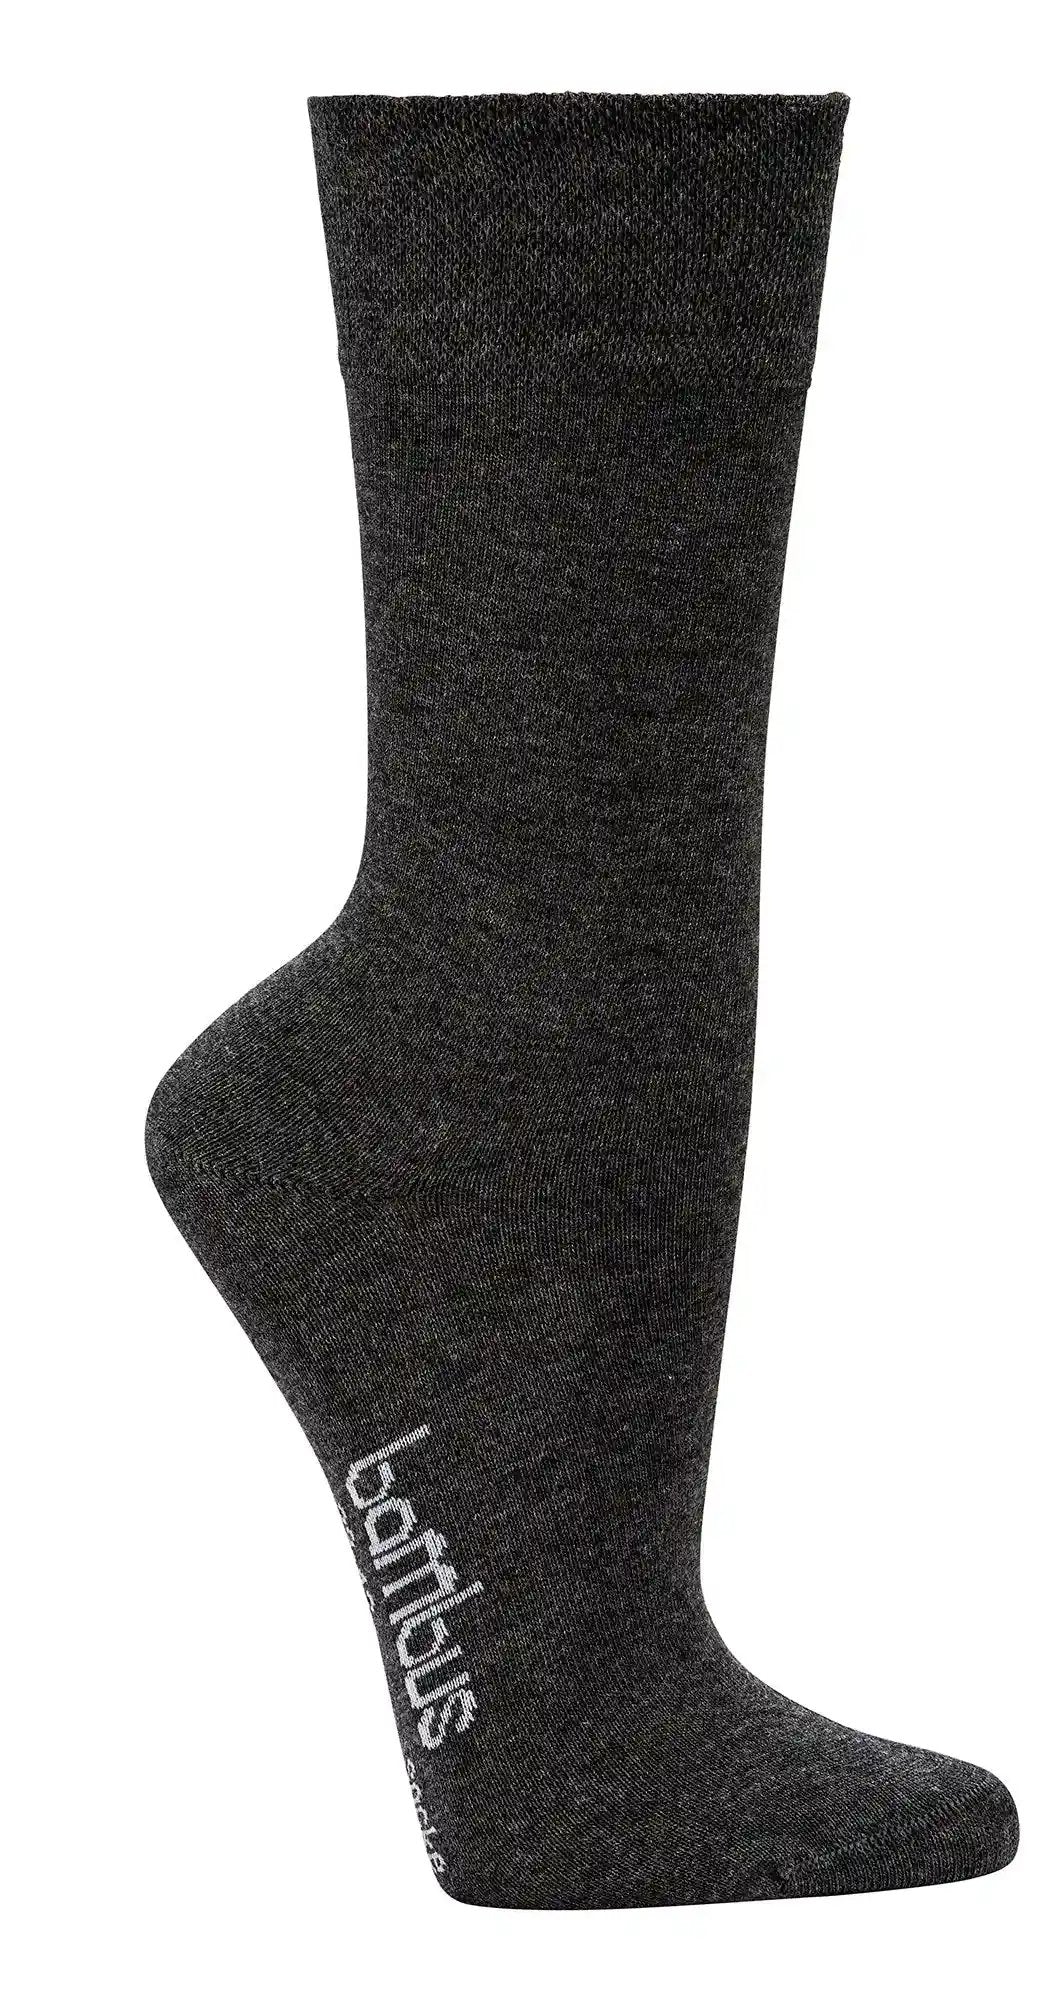 3-15 pairs of bamboo viscose socks melange soft edge without rubber for men and women